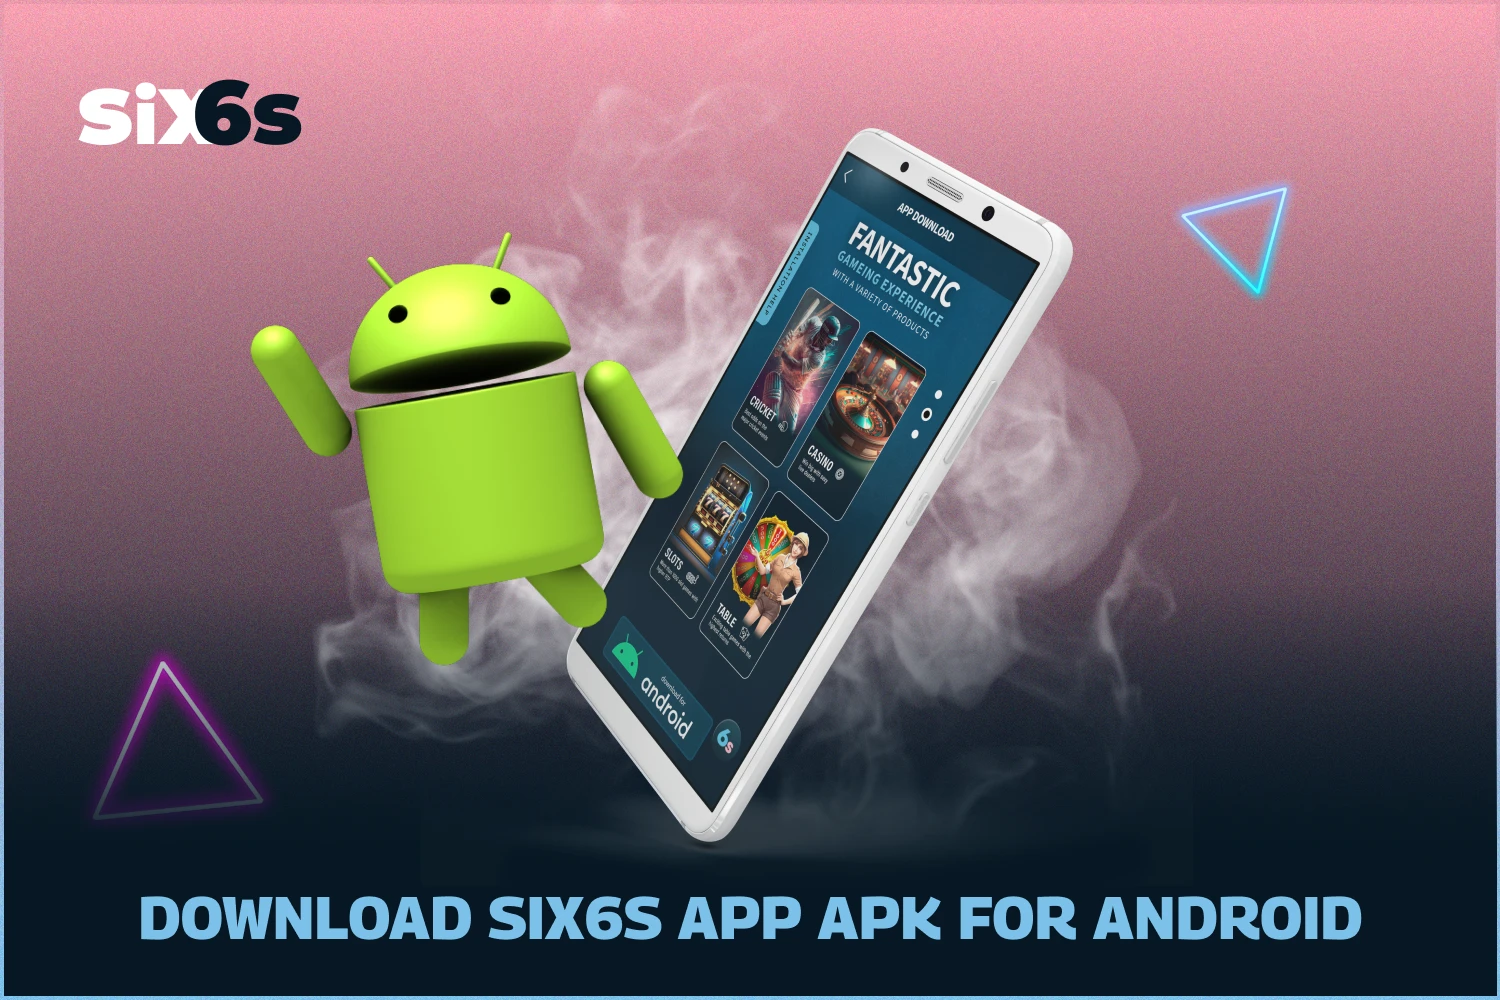 Downloading Six6s app on Android is very easy and to avoid facing unnecessary difficulties, Banglaesh players are advised to follow the step-by-step instructions